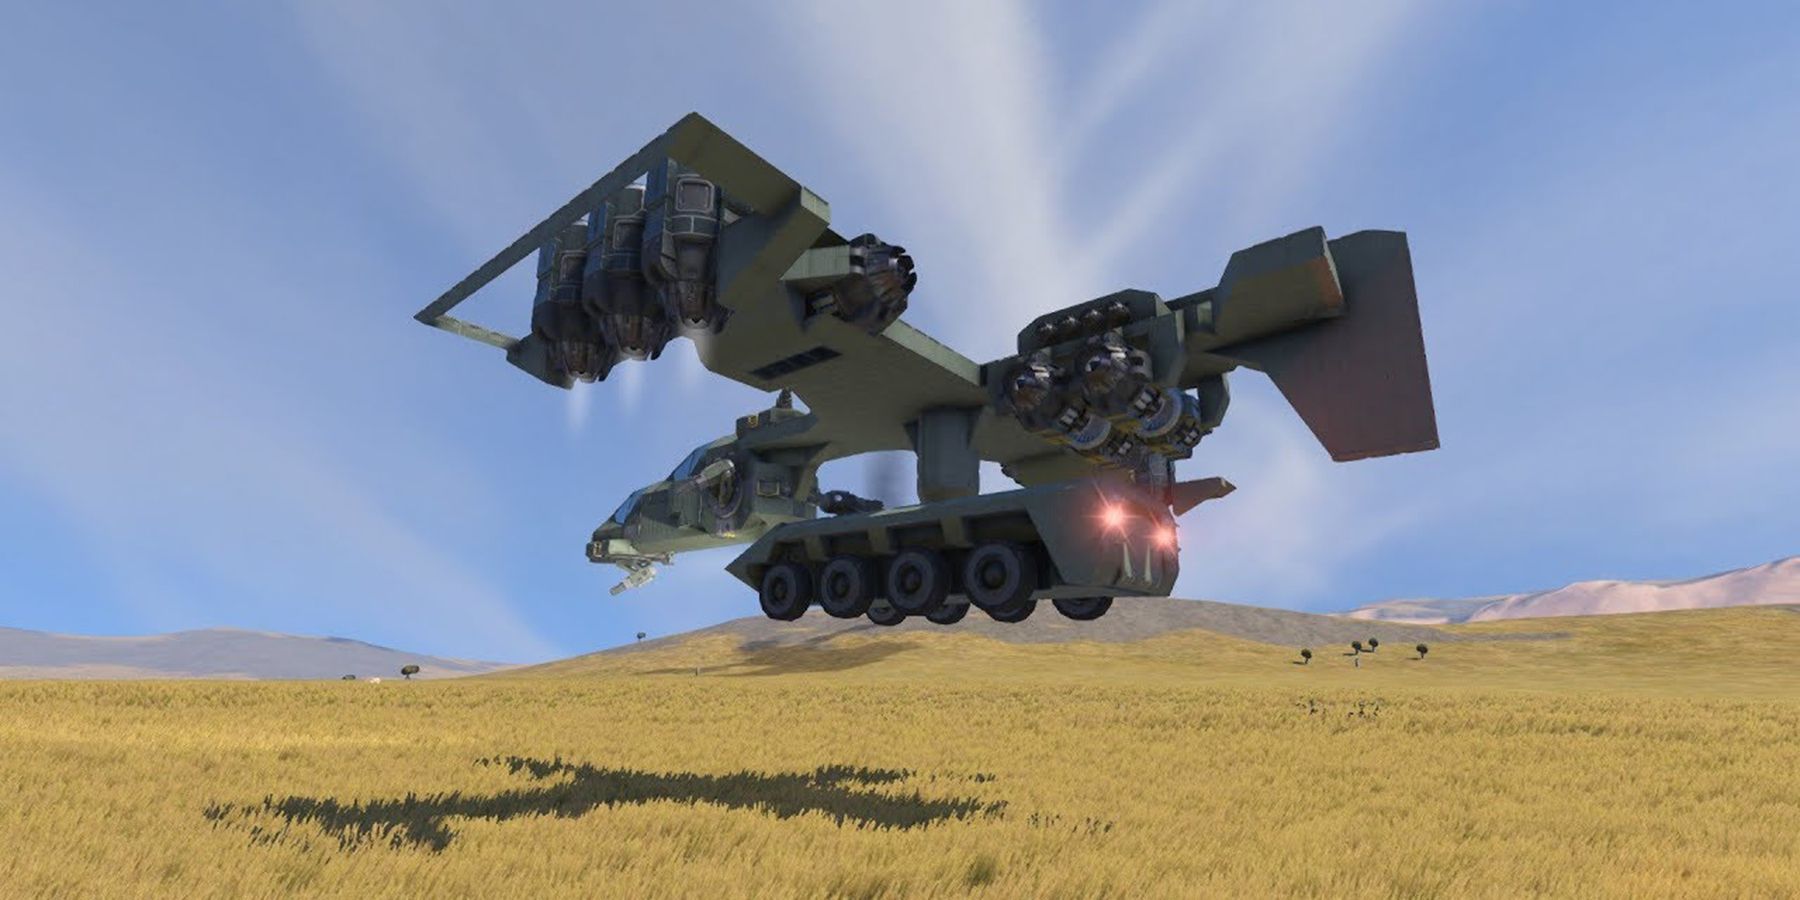 Space Engineers Carrier Plane With Ground Transport On Planet